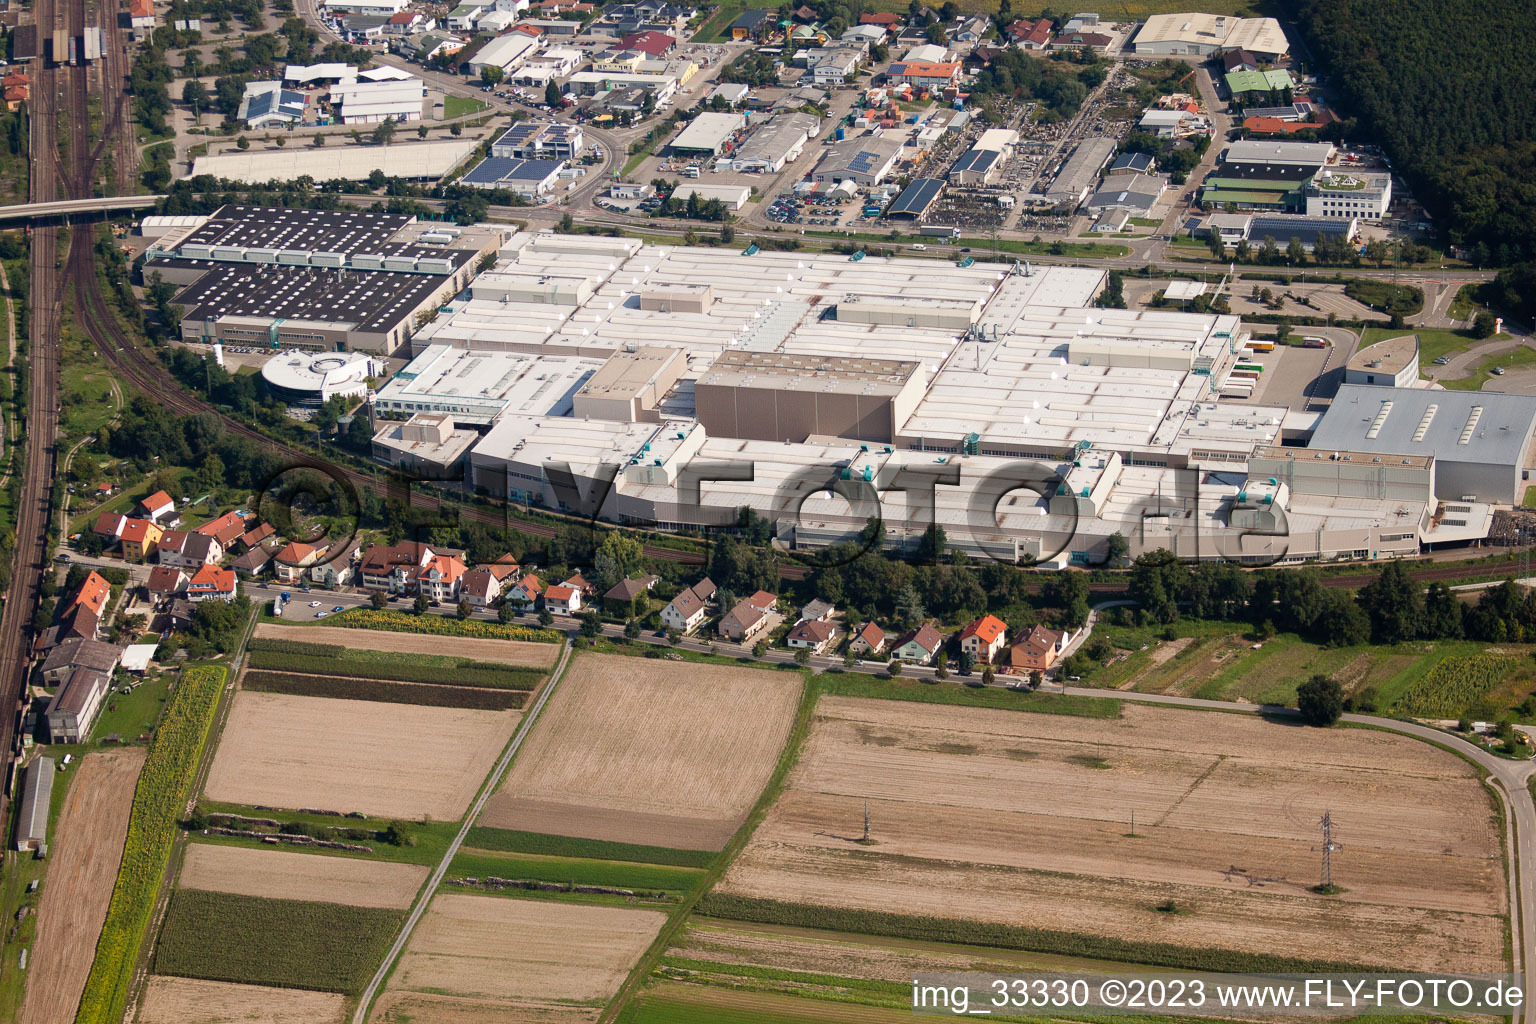 Sew-eurodrive GmbH in the district Graben in Graben-Neudorf in the state Baden-Wuerttemberg, Germany